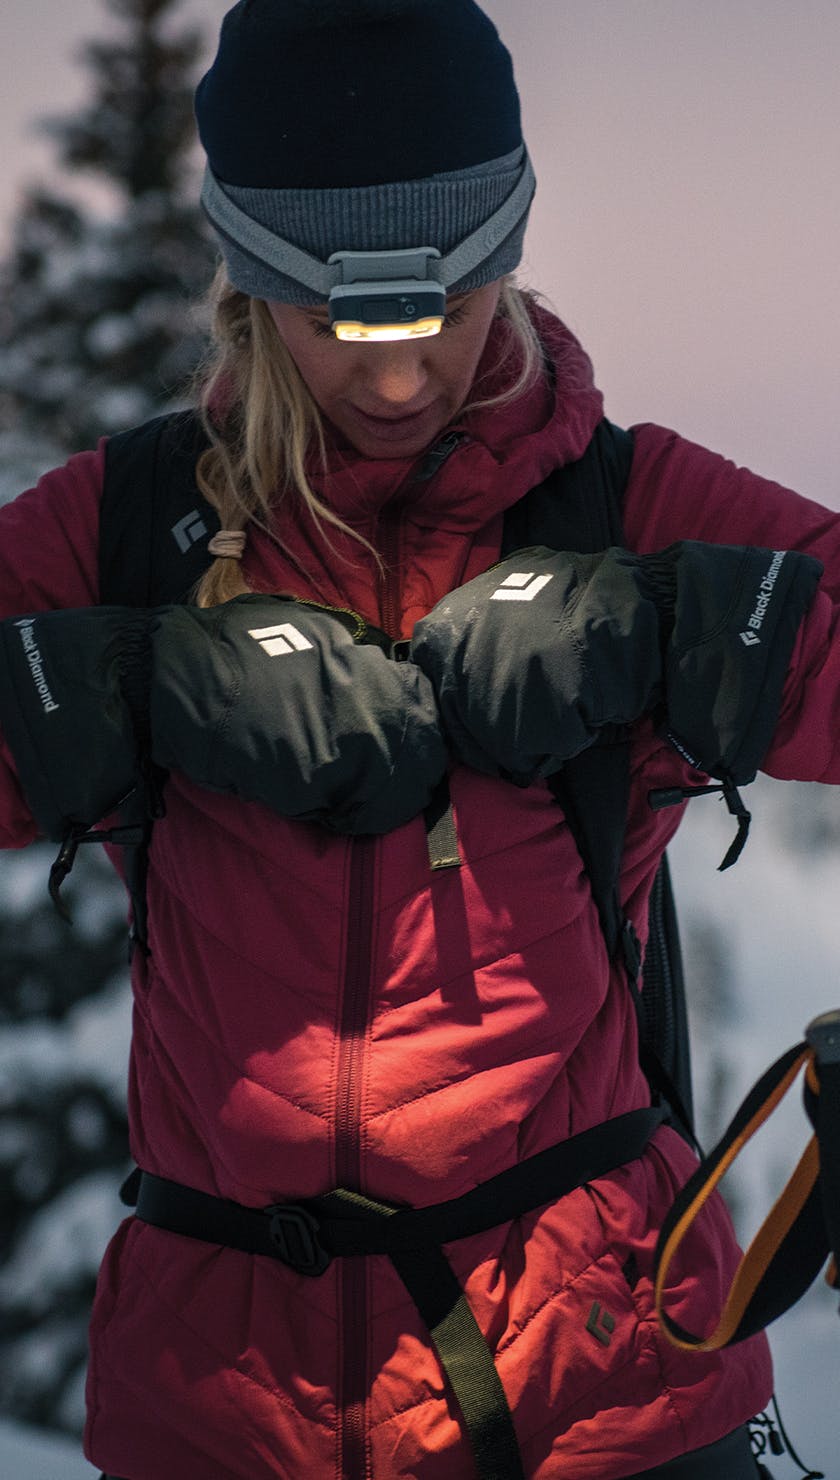 A skier wears the Black Diamond Absolute mitts on a frigid morning.